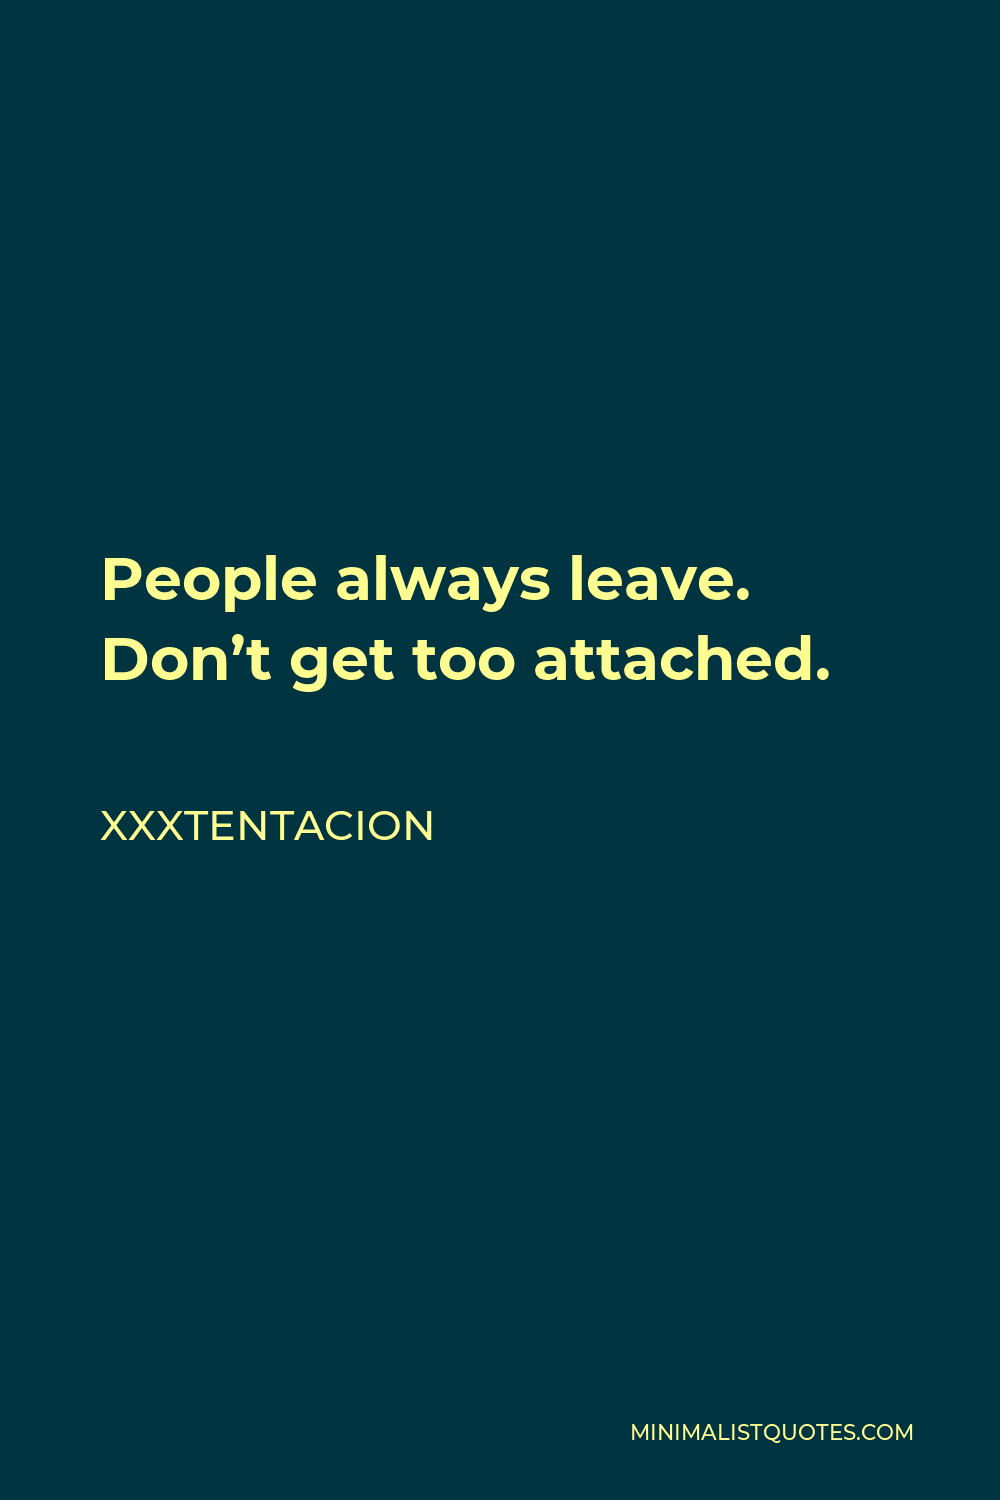 Xxxtentacion Quote - People always leave. Don’t get too attached.